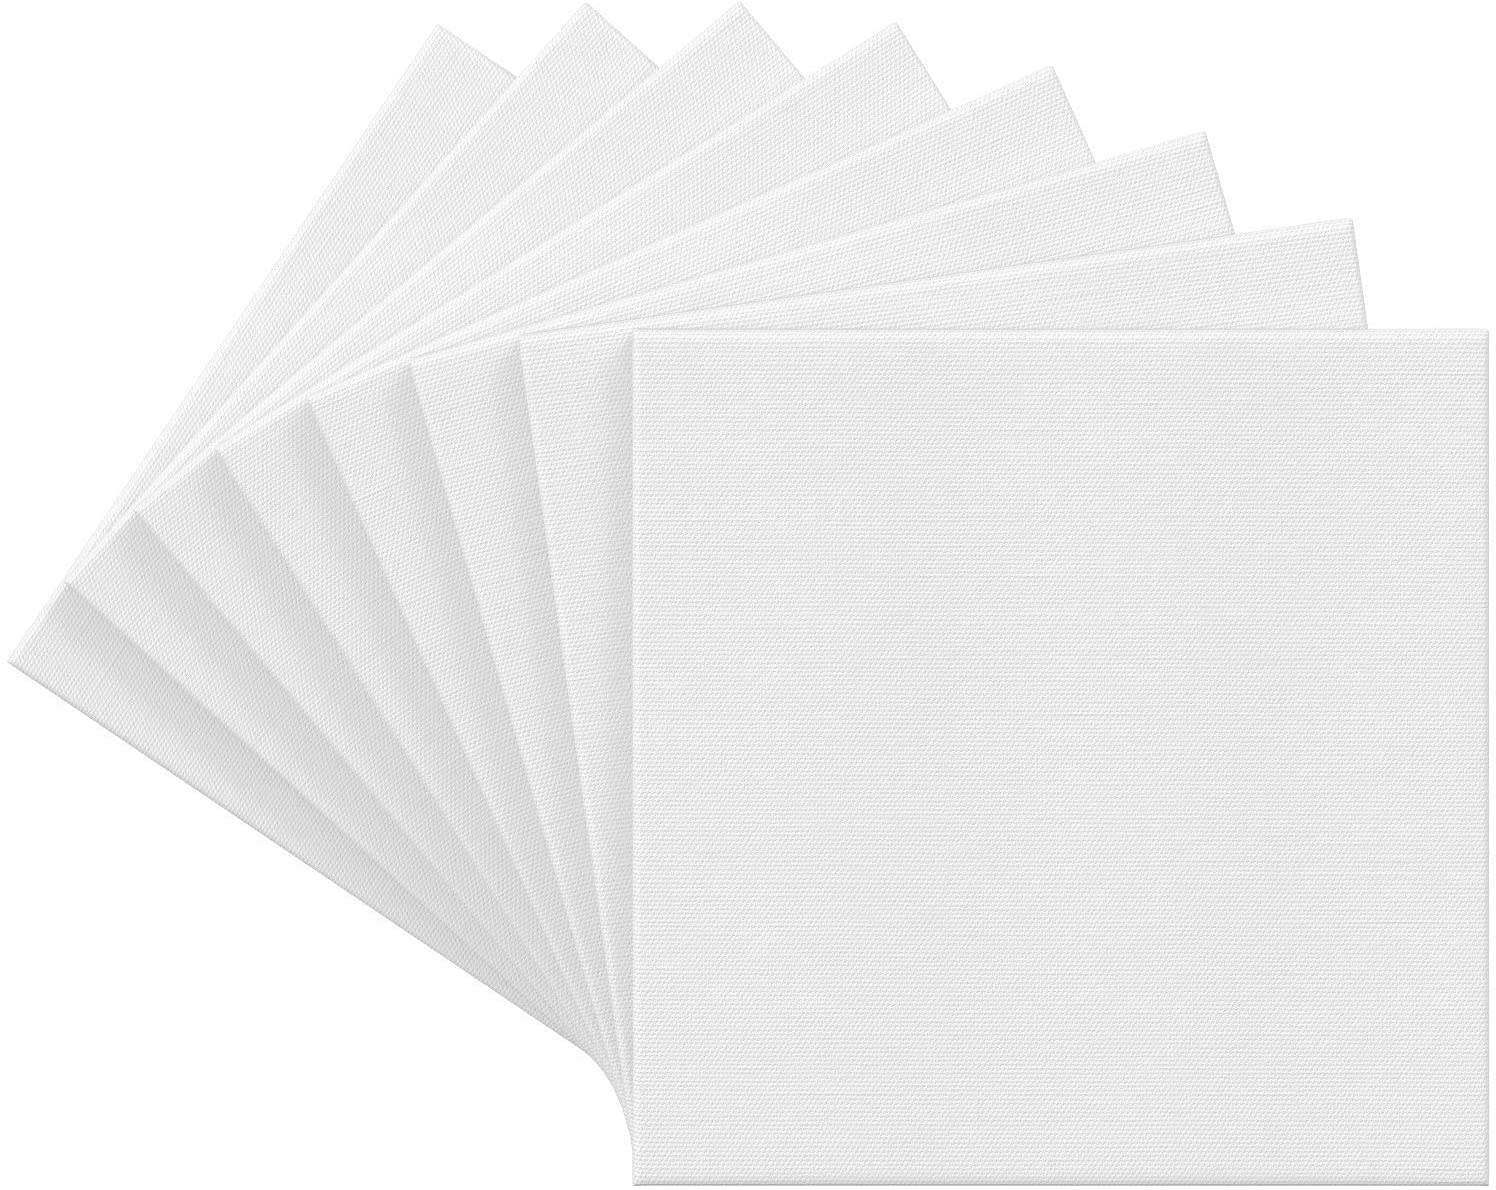 Arteza Stretched Canvas, Premium, White, 12x12, Blank Canvas Boards For  Painting - 8 Pack : Target